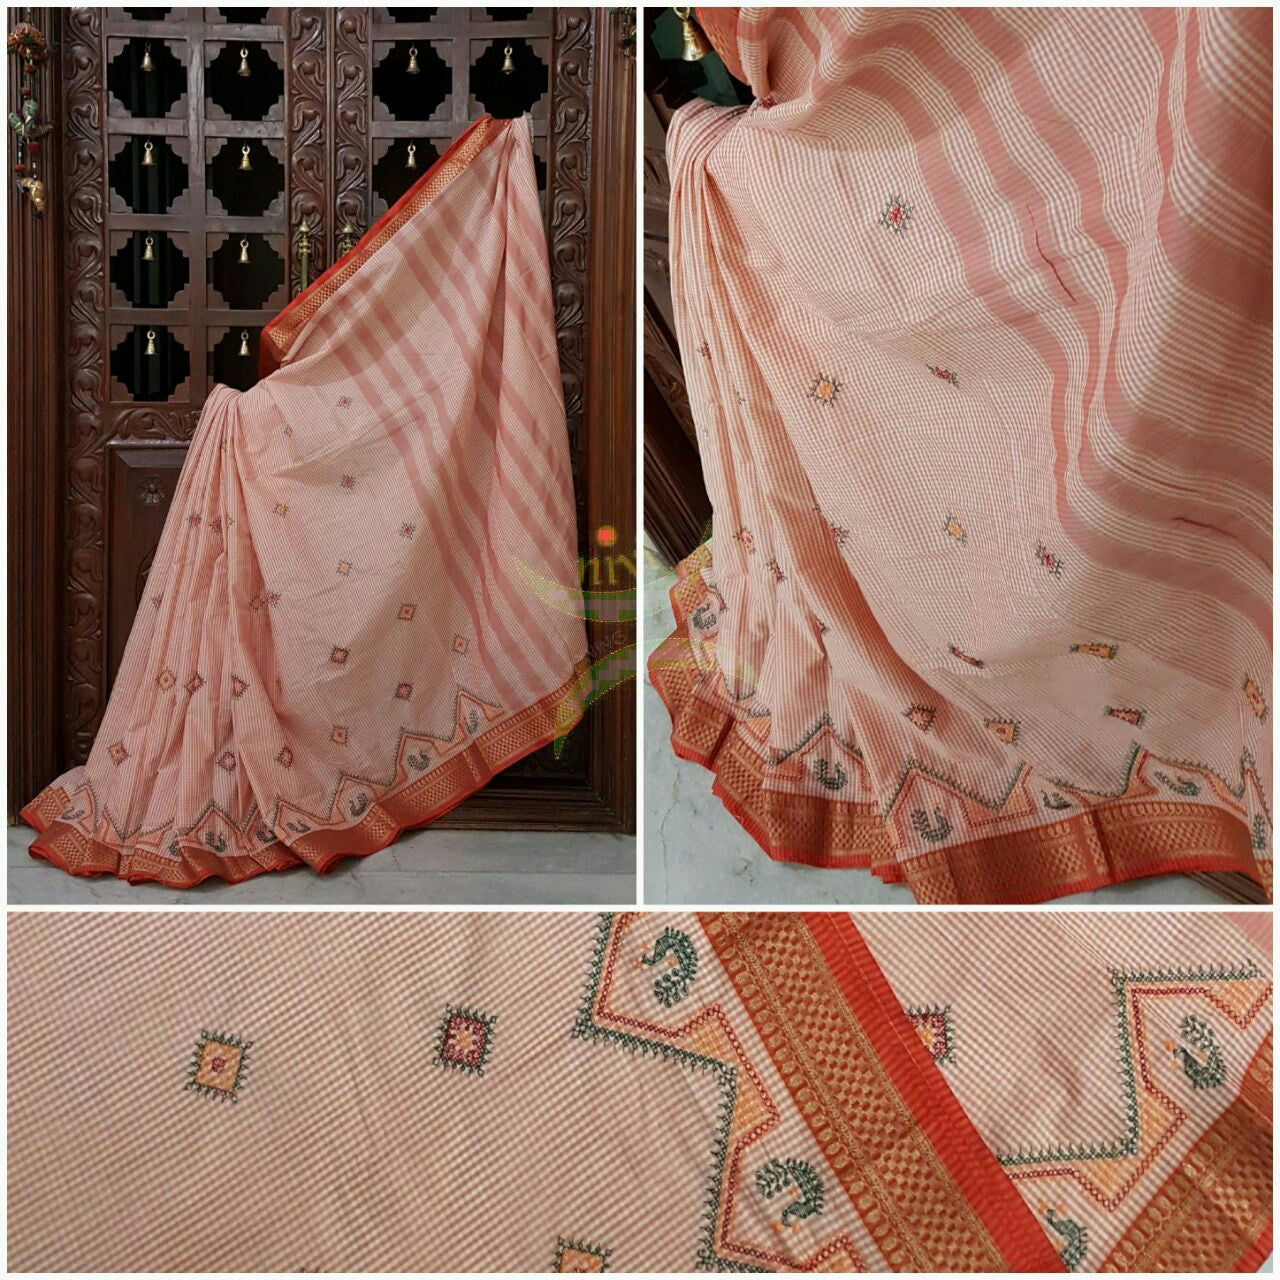 Peach kota Cotton chequered saree with kasuti embroidery..saree is woven with contrasting zari border.